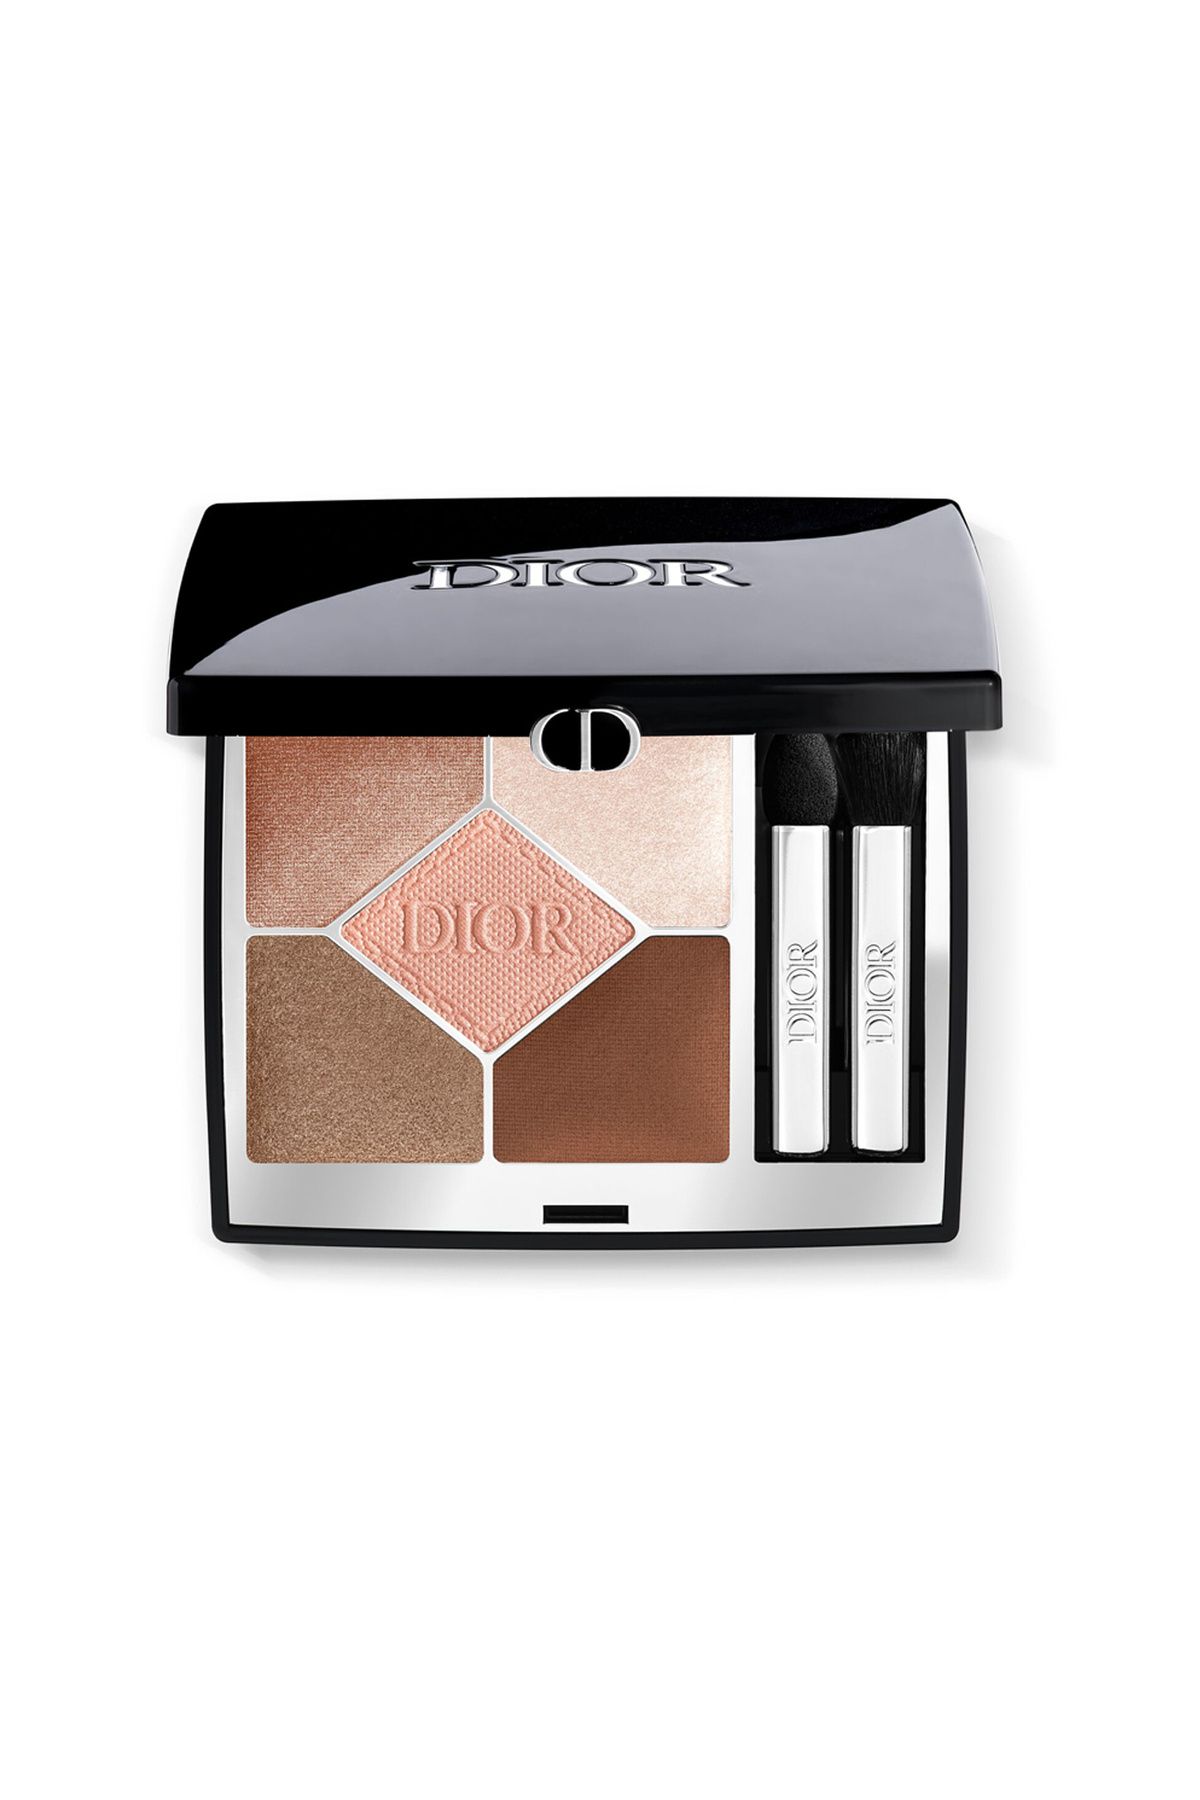 Dior DİORSHOW INTENSELY PİGMENTED EYESHADOW - 649 NUDE DRESS DEMBA2598